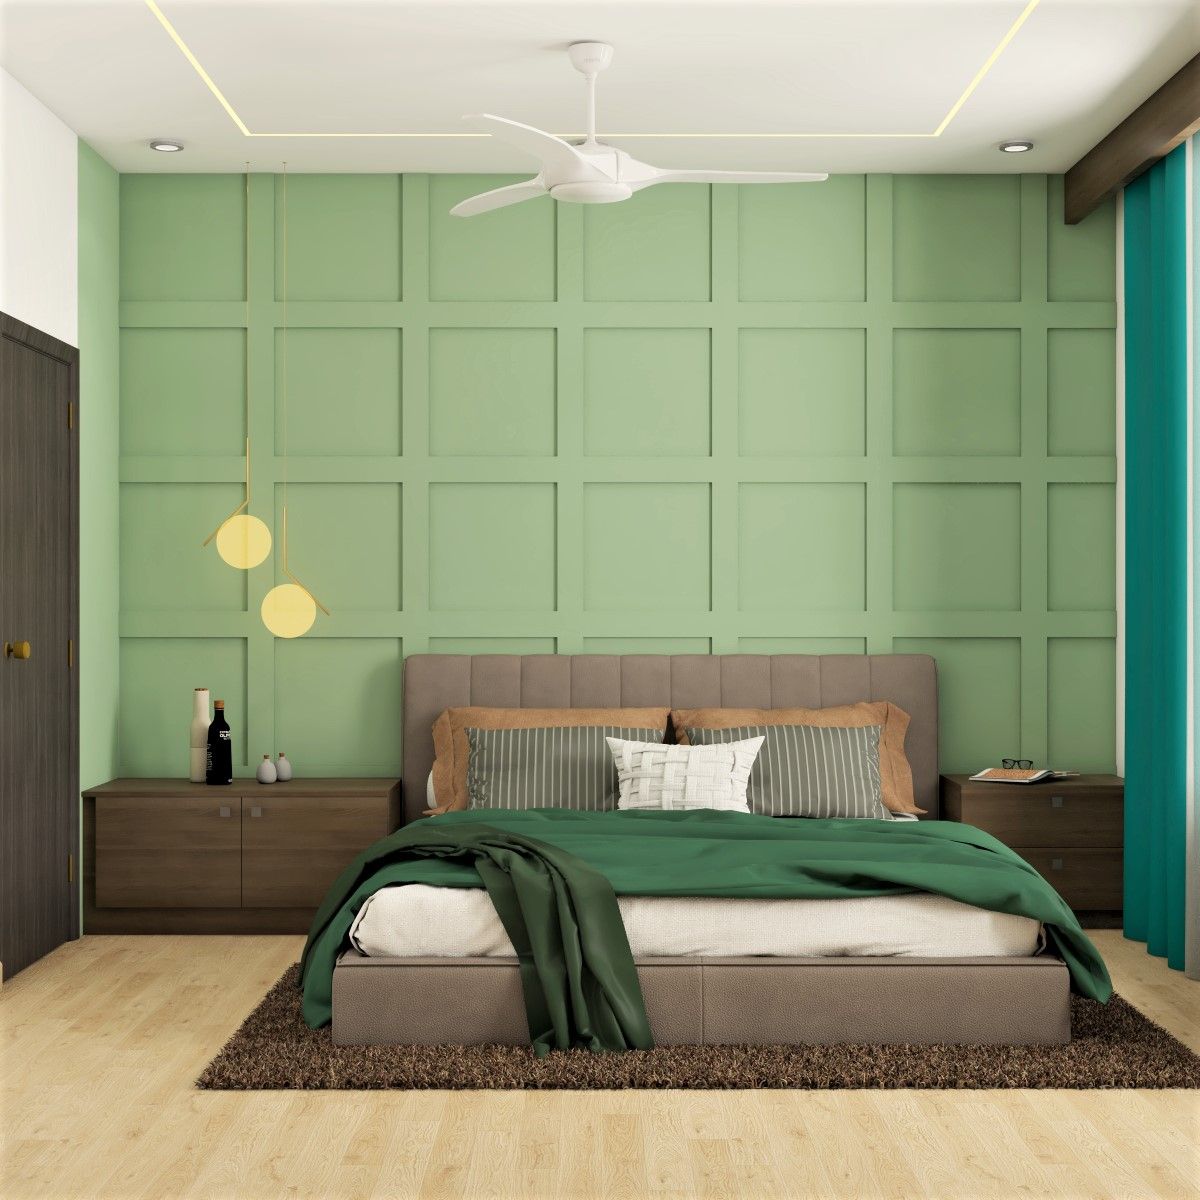 Spacious Master Bedroom Design With Green Trims And Beige Tufted ...